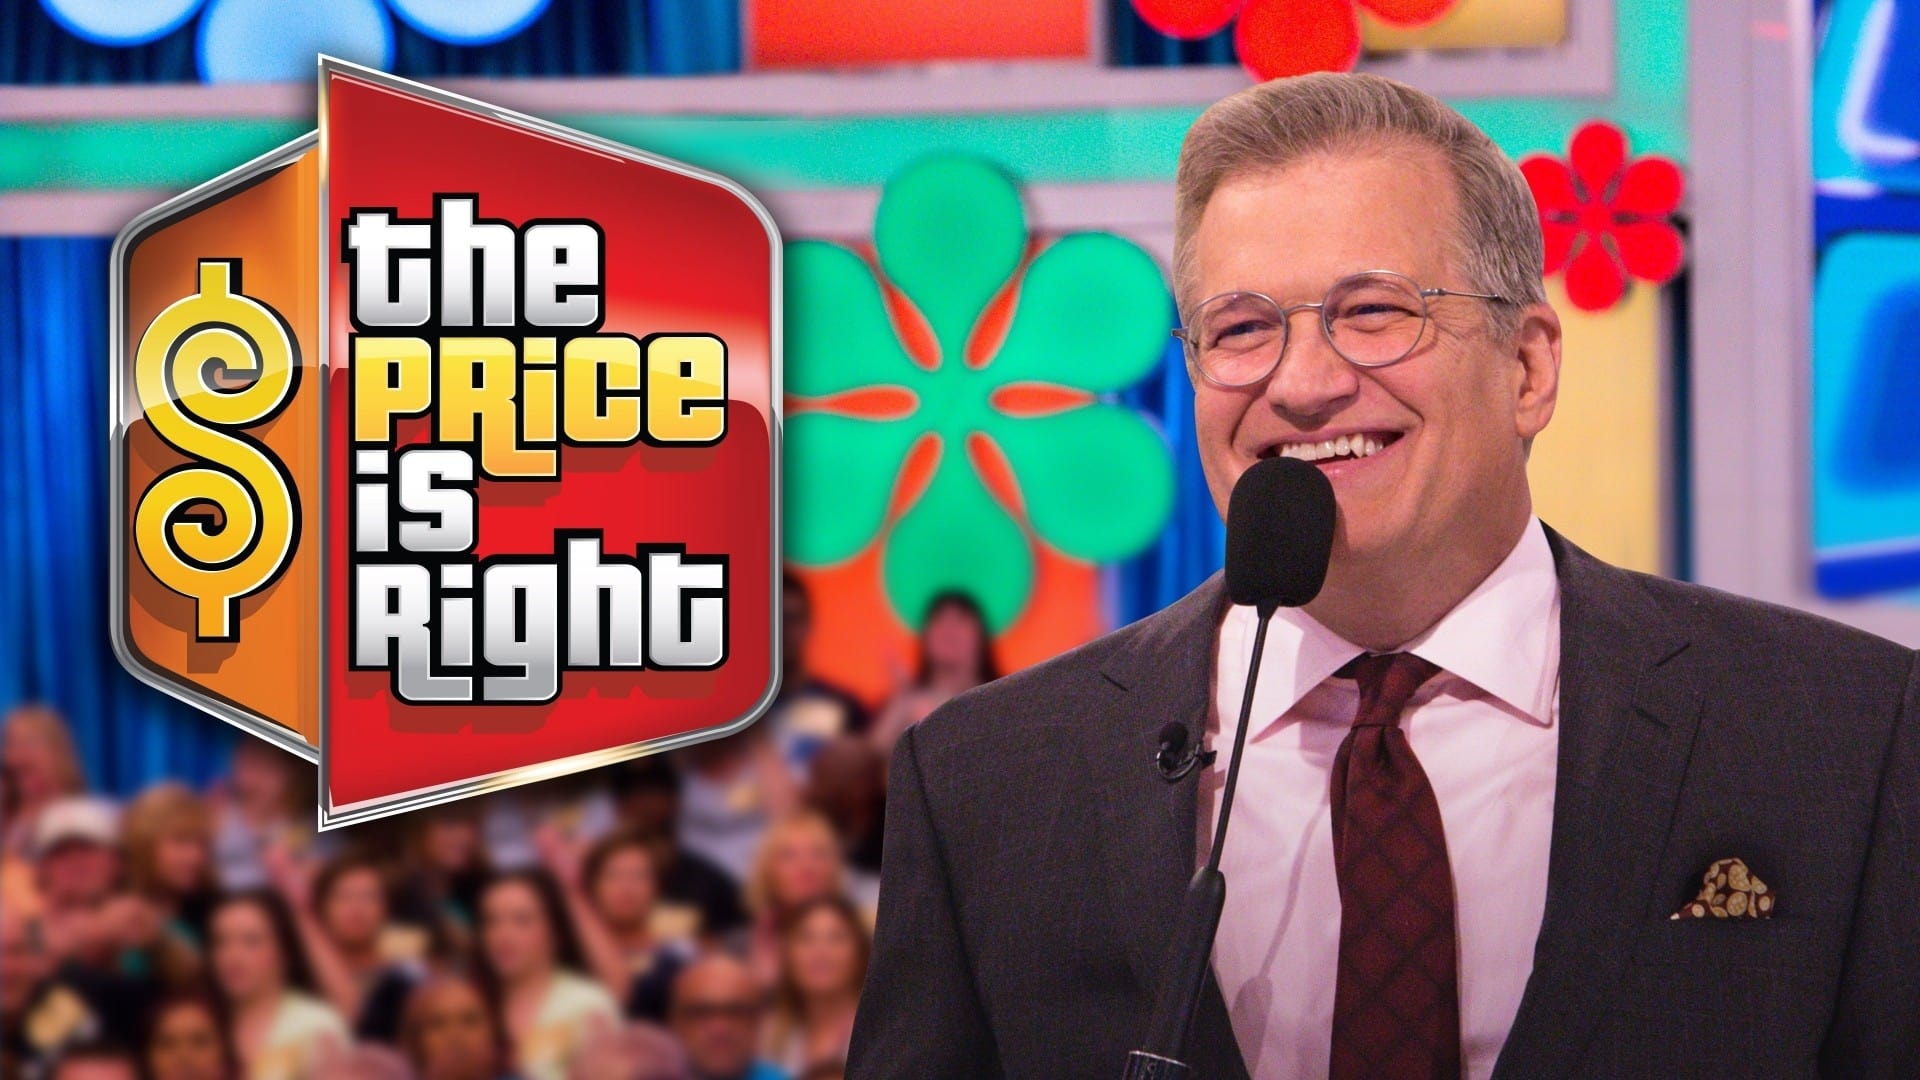 The Price Is Right - Season 1 Episode 11 : The Price Is Right Season 1 Episode 11